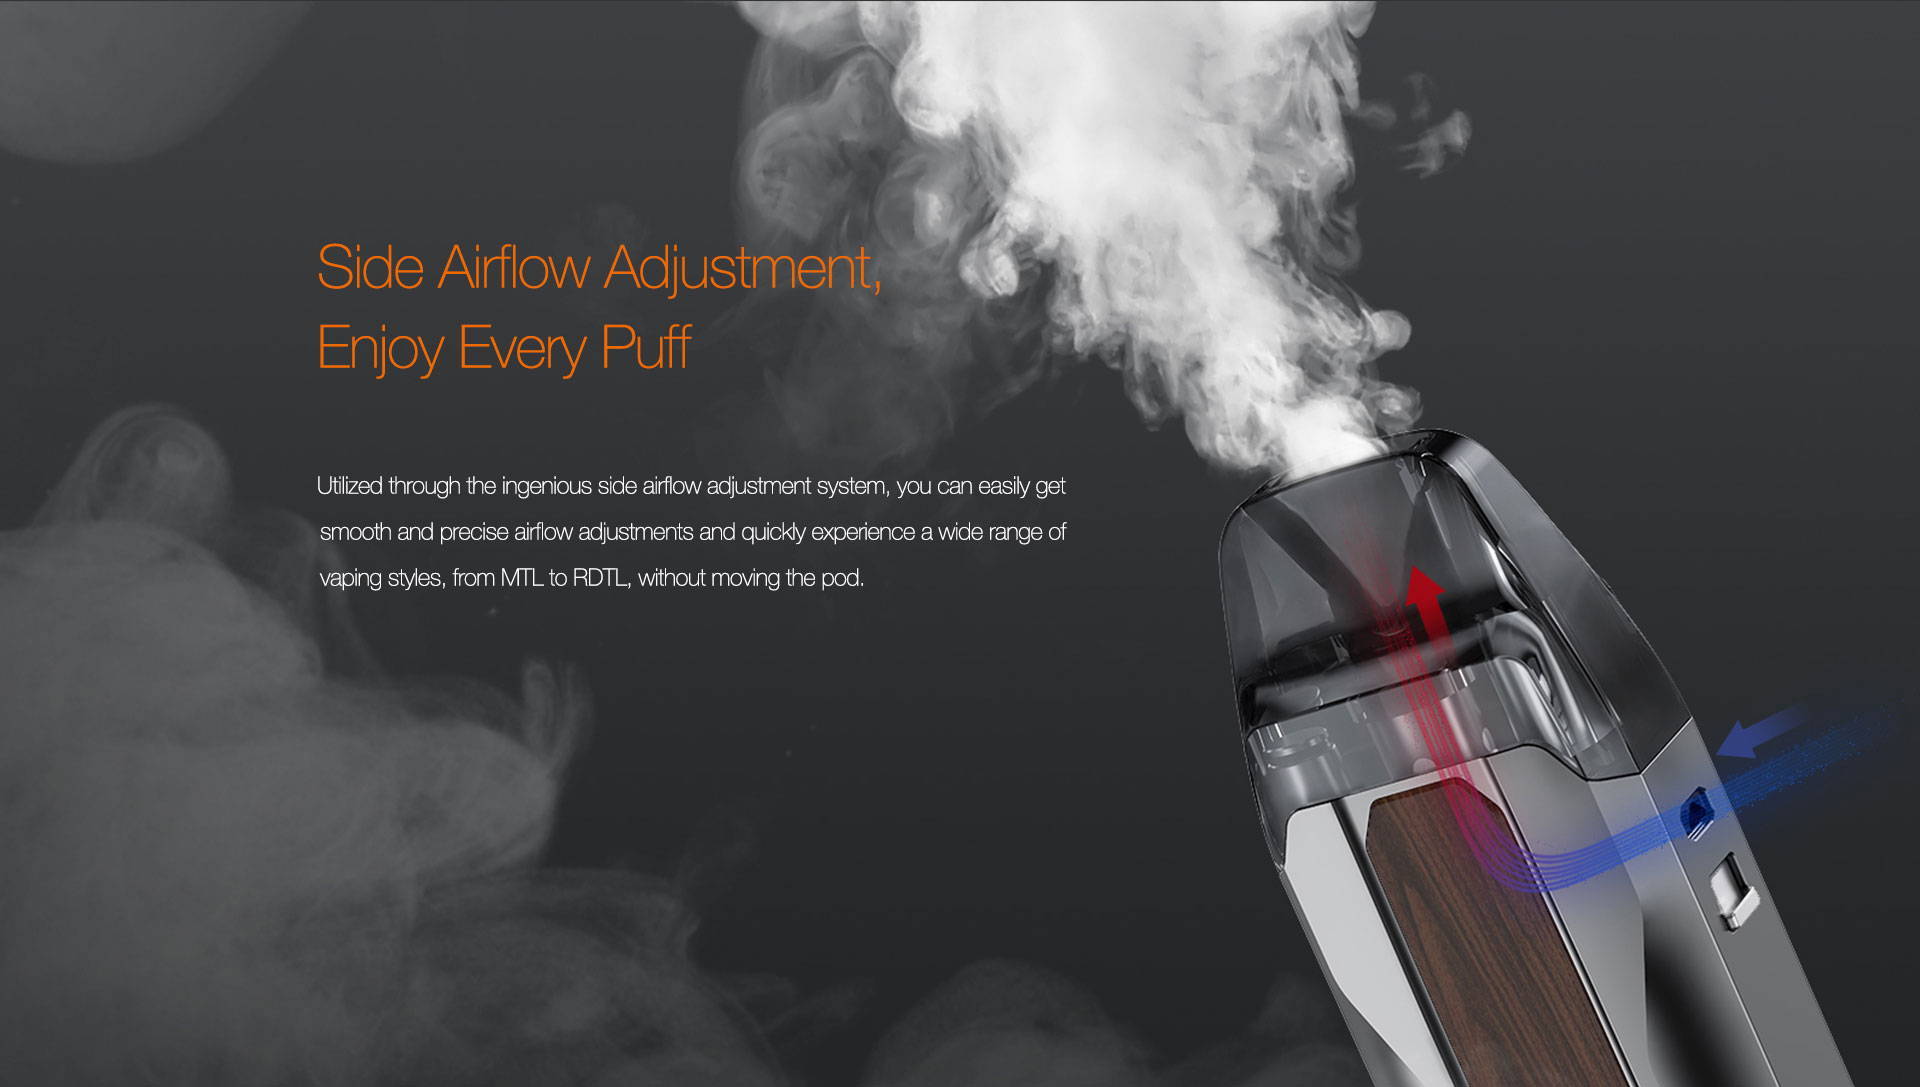 Side Airflow Adjustment, Enjoy Every Puff  Utilized through the ingenious side airflow adjustment system, you can easily get smooth and precise airflow adjustments and quickly experience a wide range of vaping styles, from MTL to RDTL, without moving the pod.